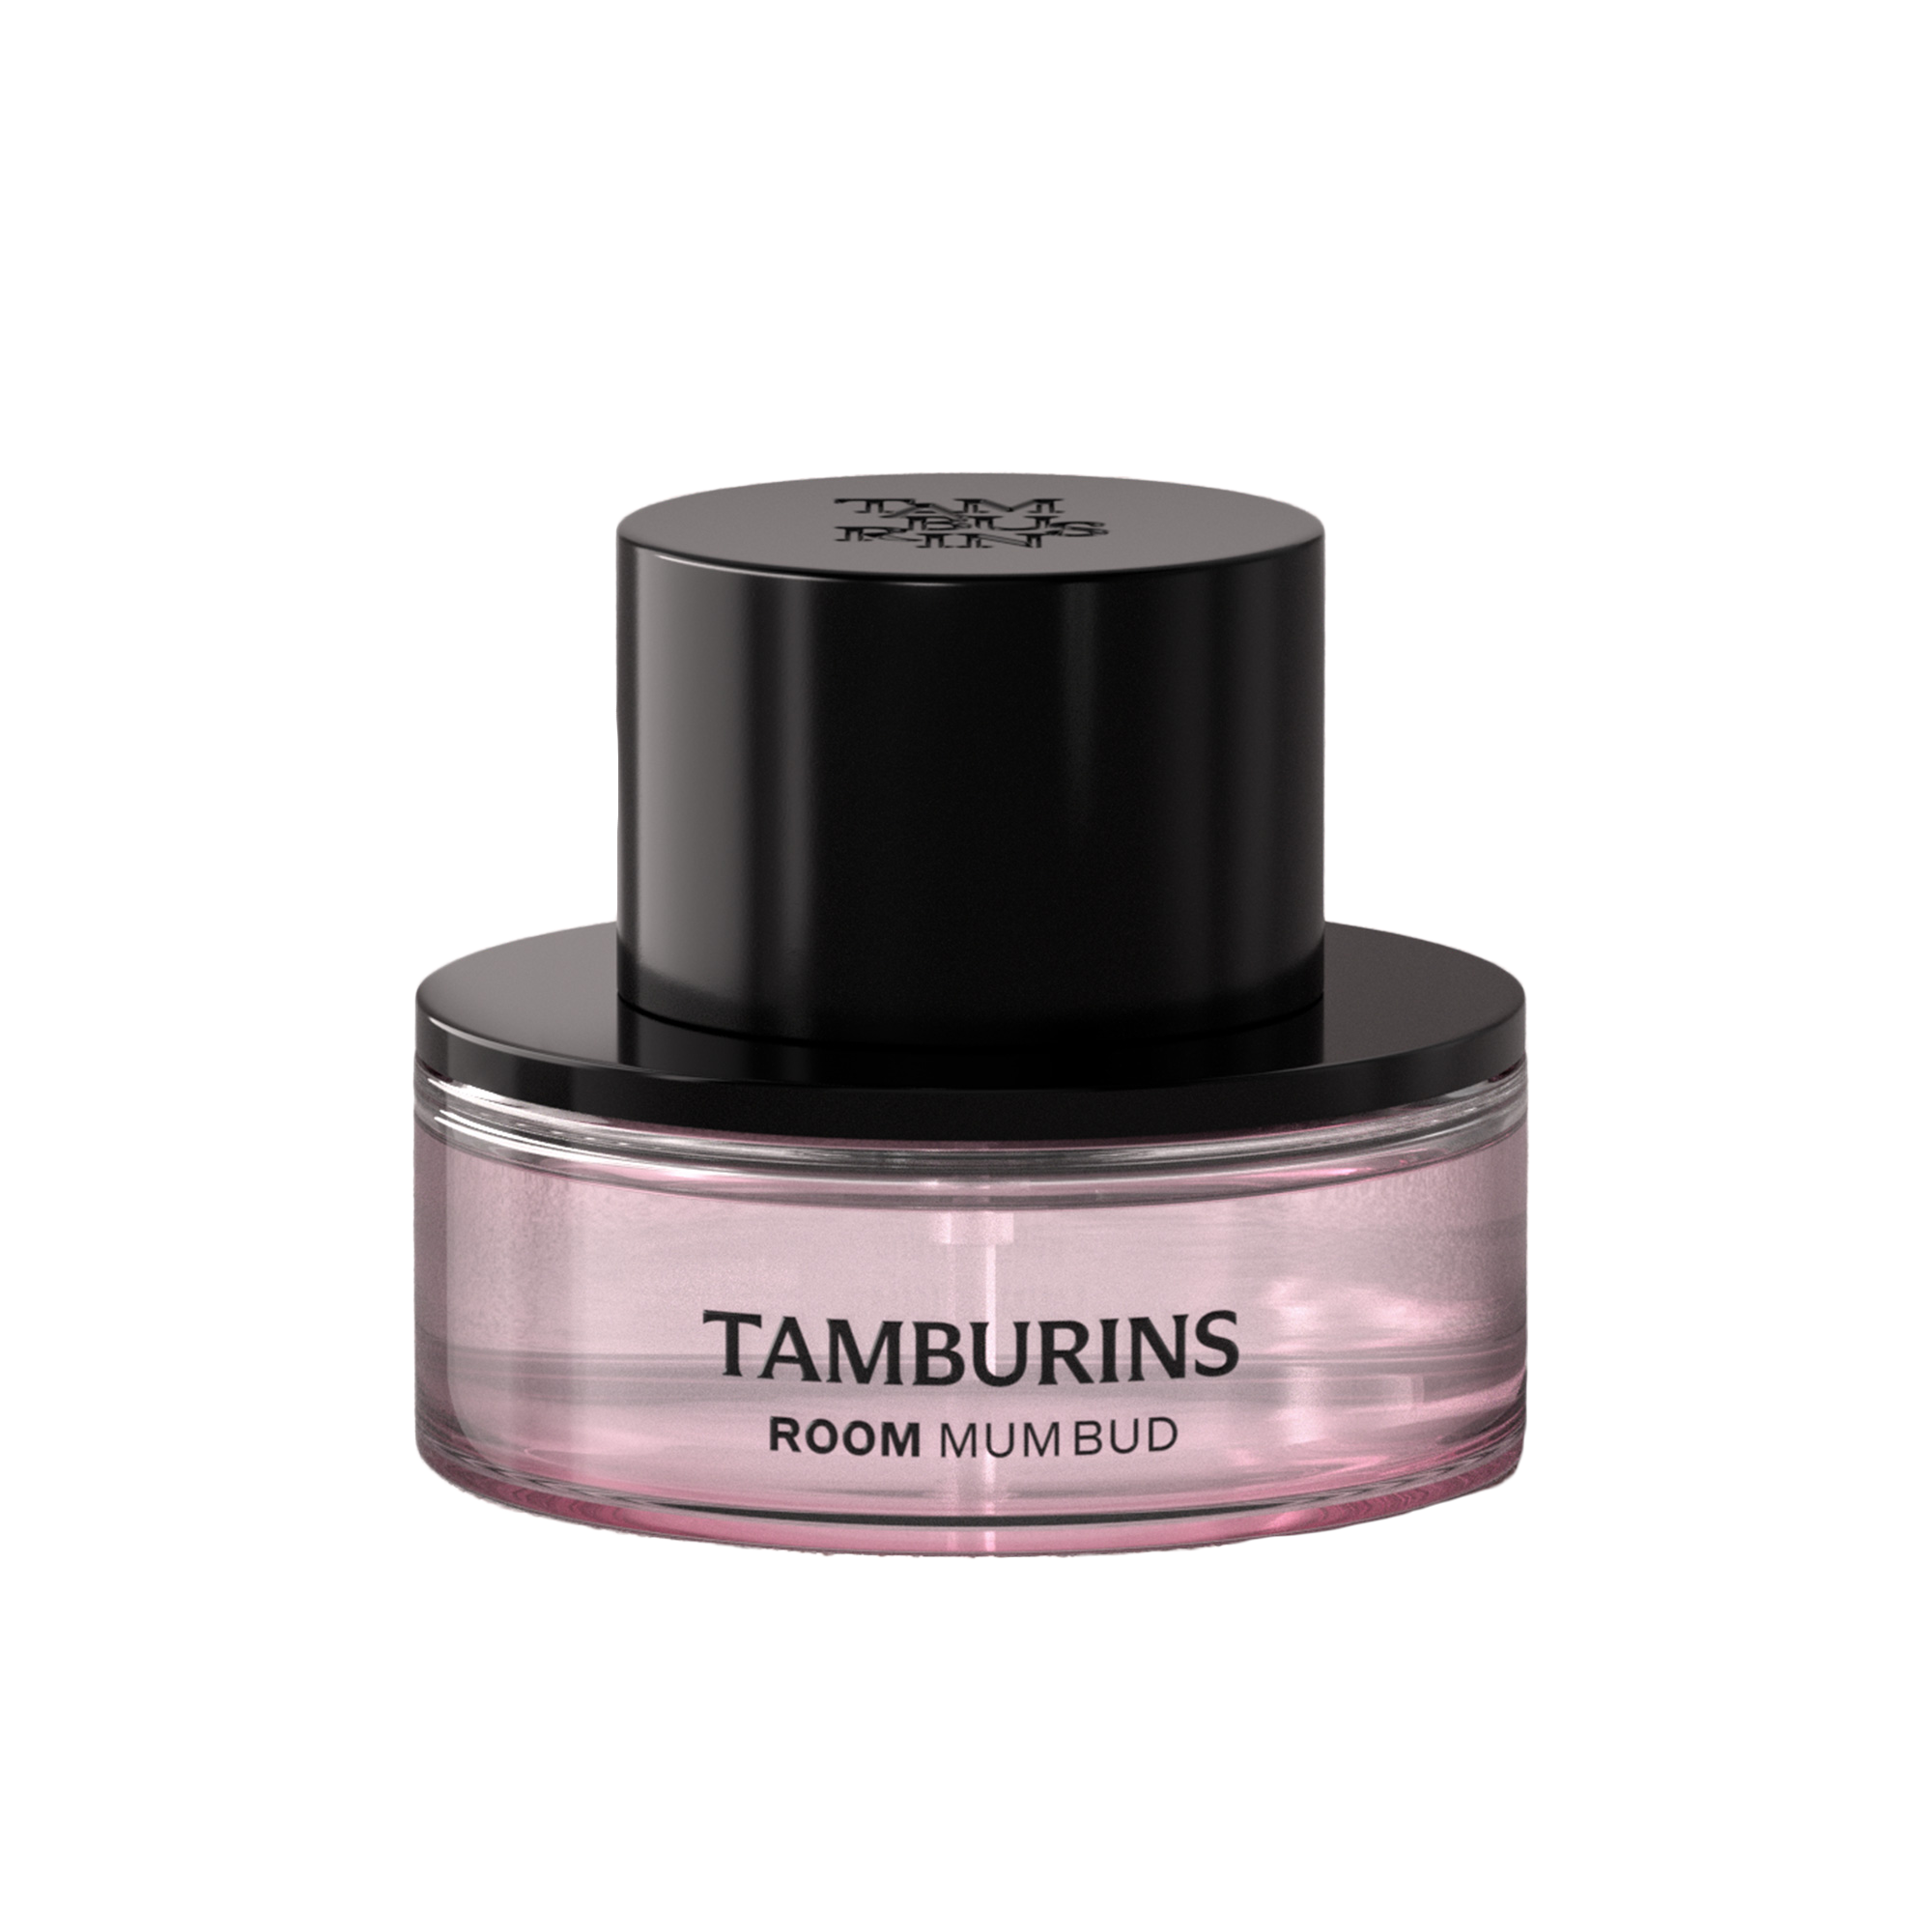 A bottle of Tamburins Rose Water Eau de Parfum, a delicate and floral fragrance for a refreshing scent.